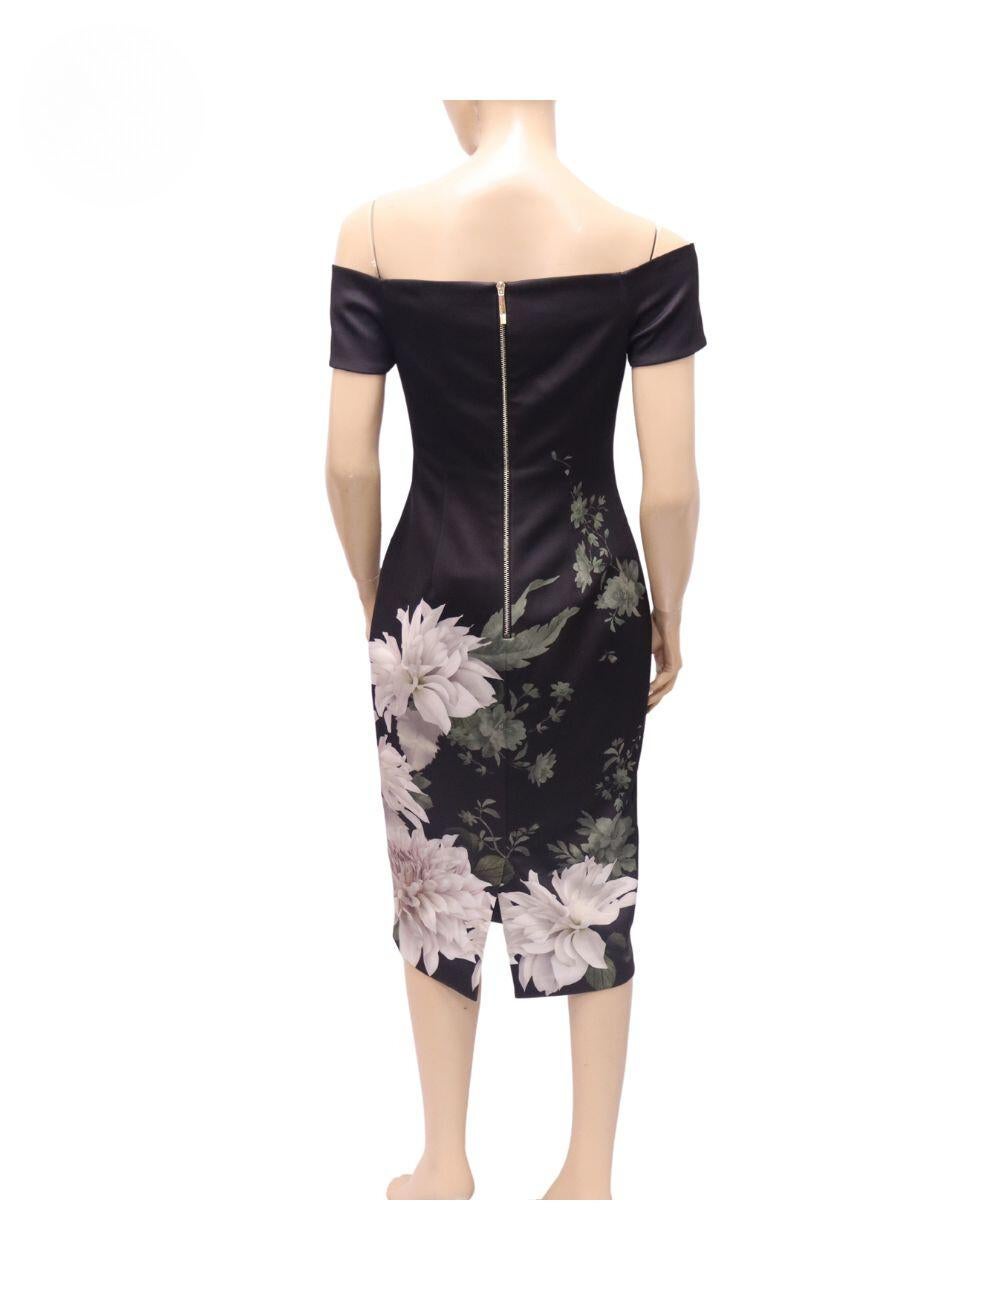 Ted Baker Peaony Clove Bardot Bodycon Dress Size M In Excellent Condition For Sale In Amman, JO